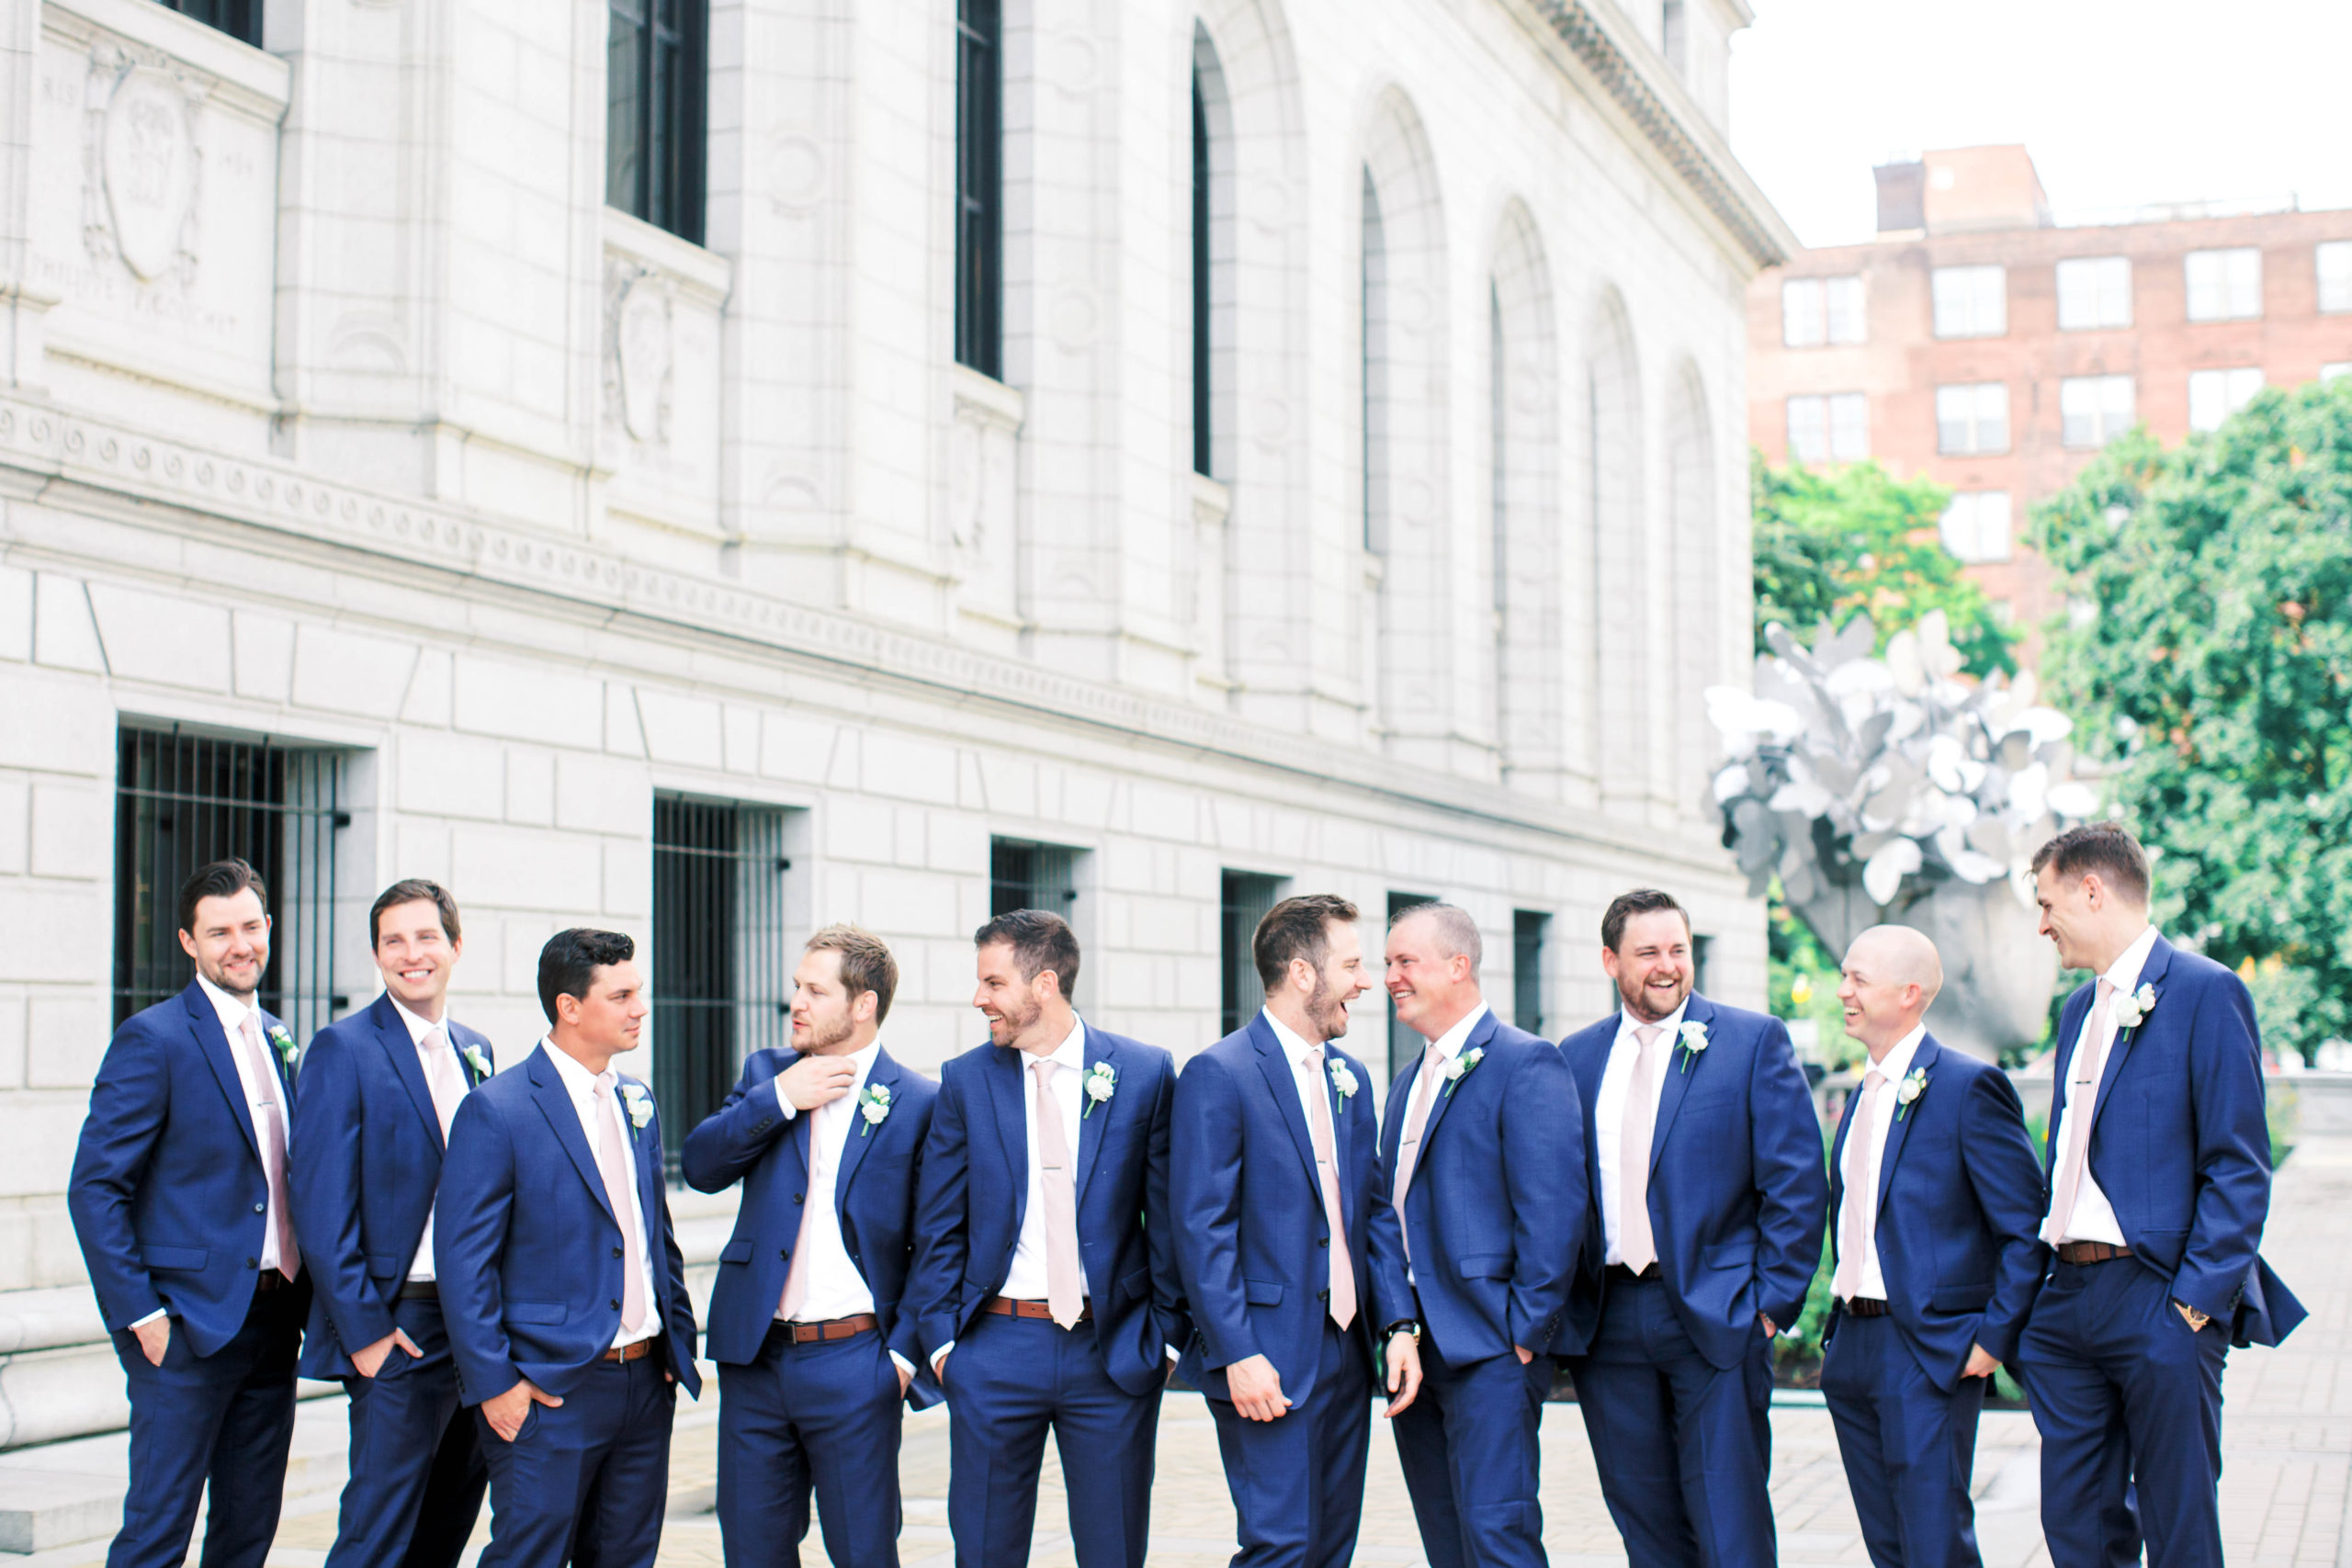 st louis downtown central library groomsmen navy tux